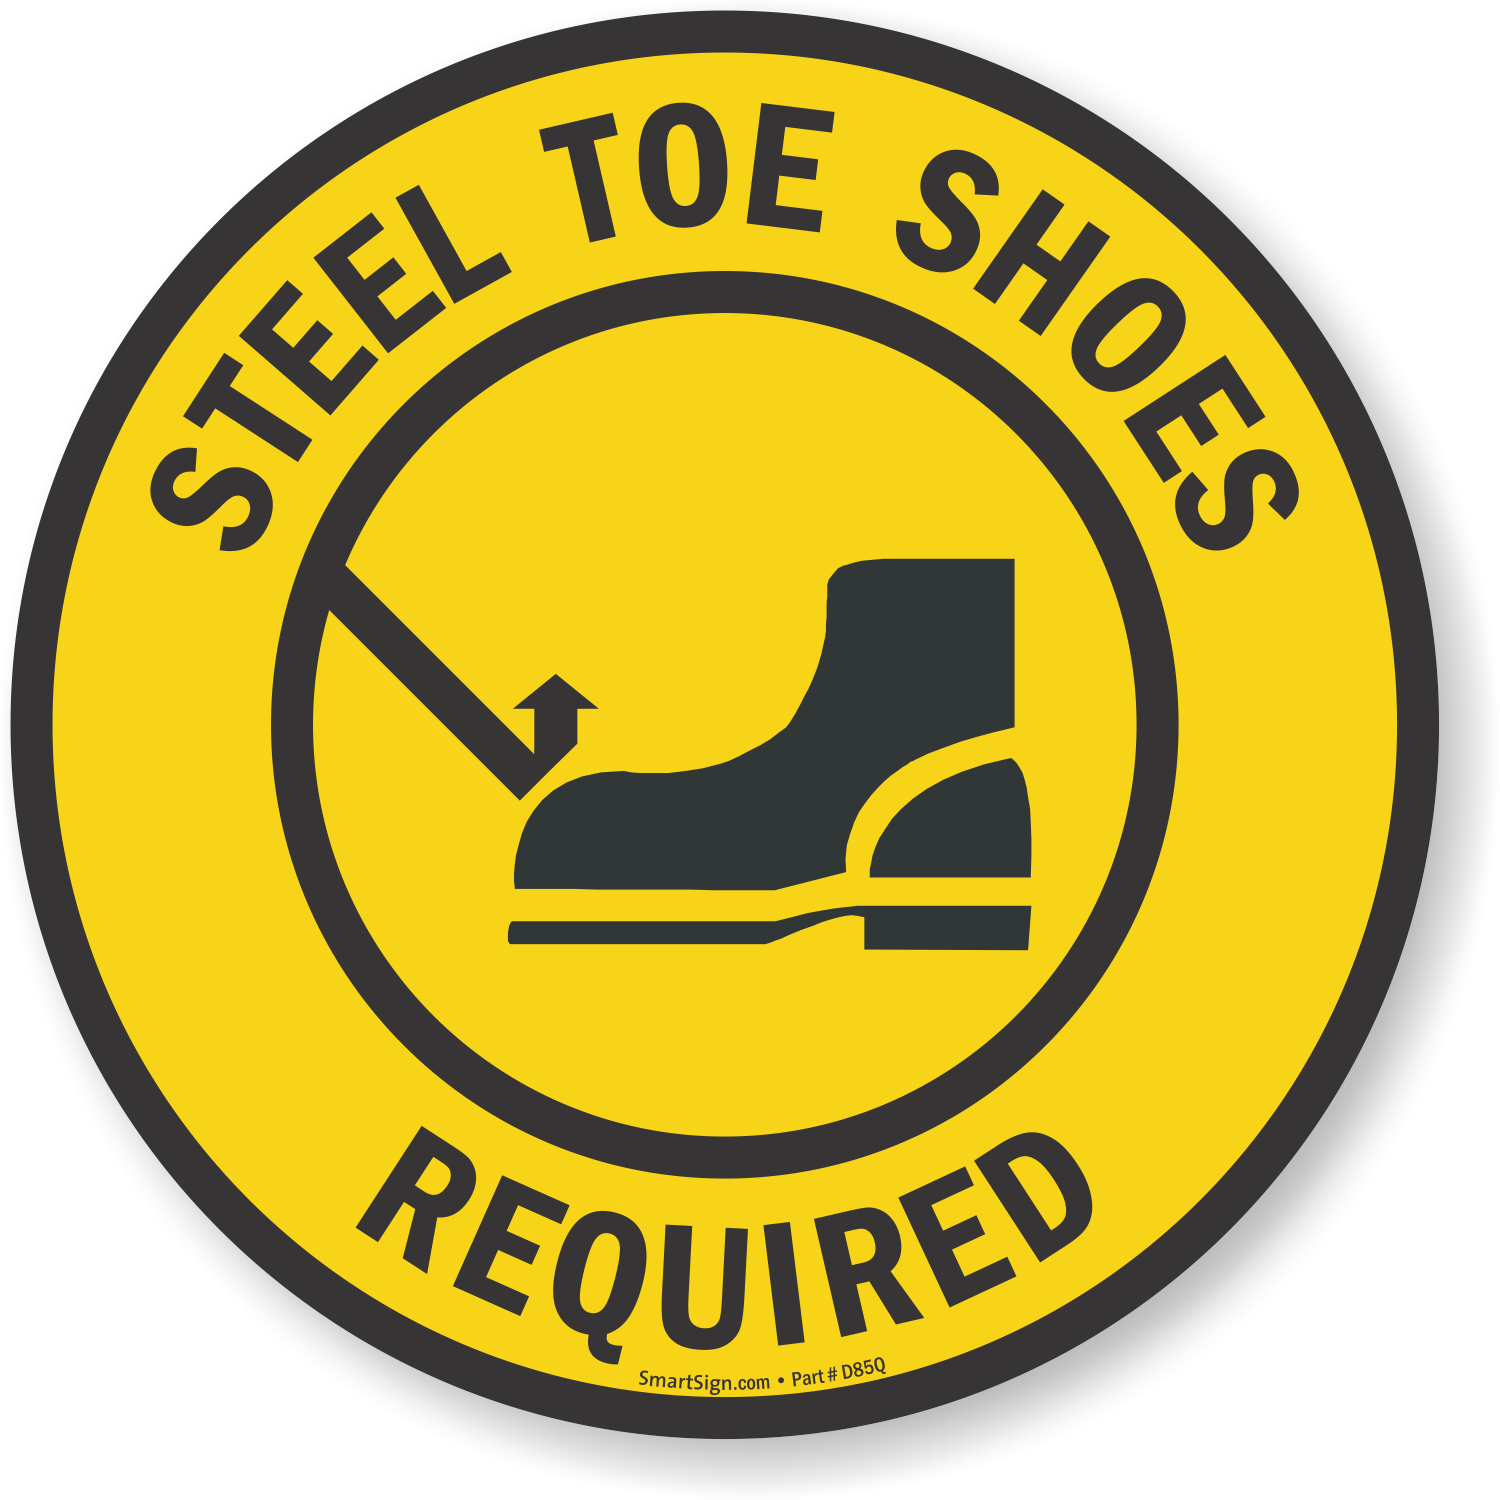 Steel Toe Shoes Required Adhesive Floor Sign, SKU: SF-0106